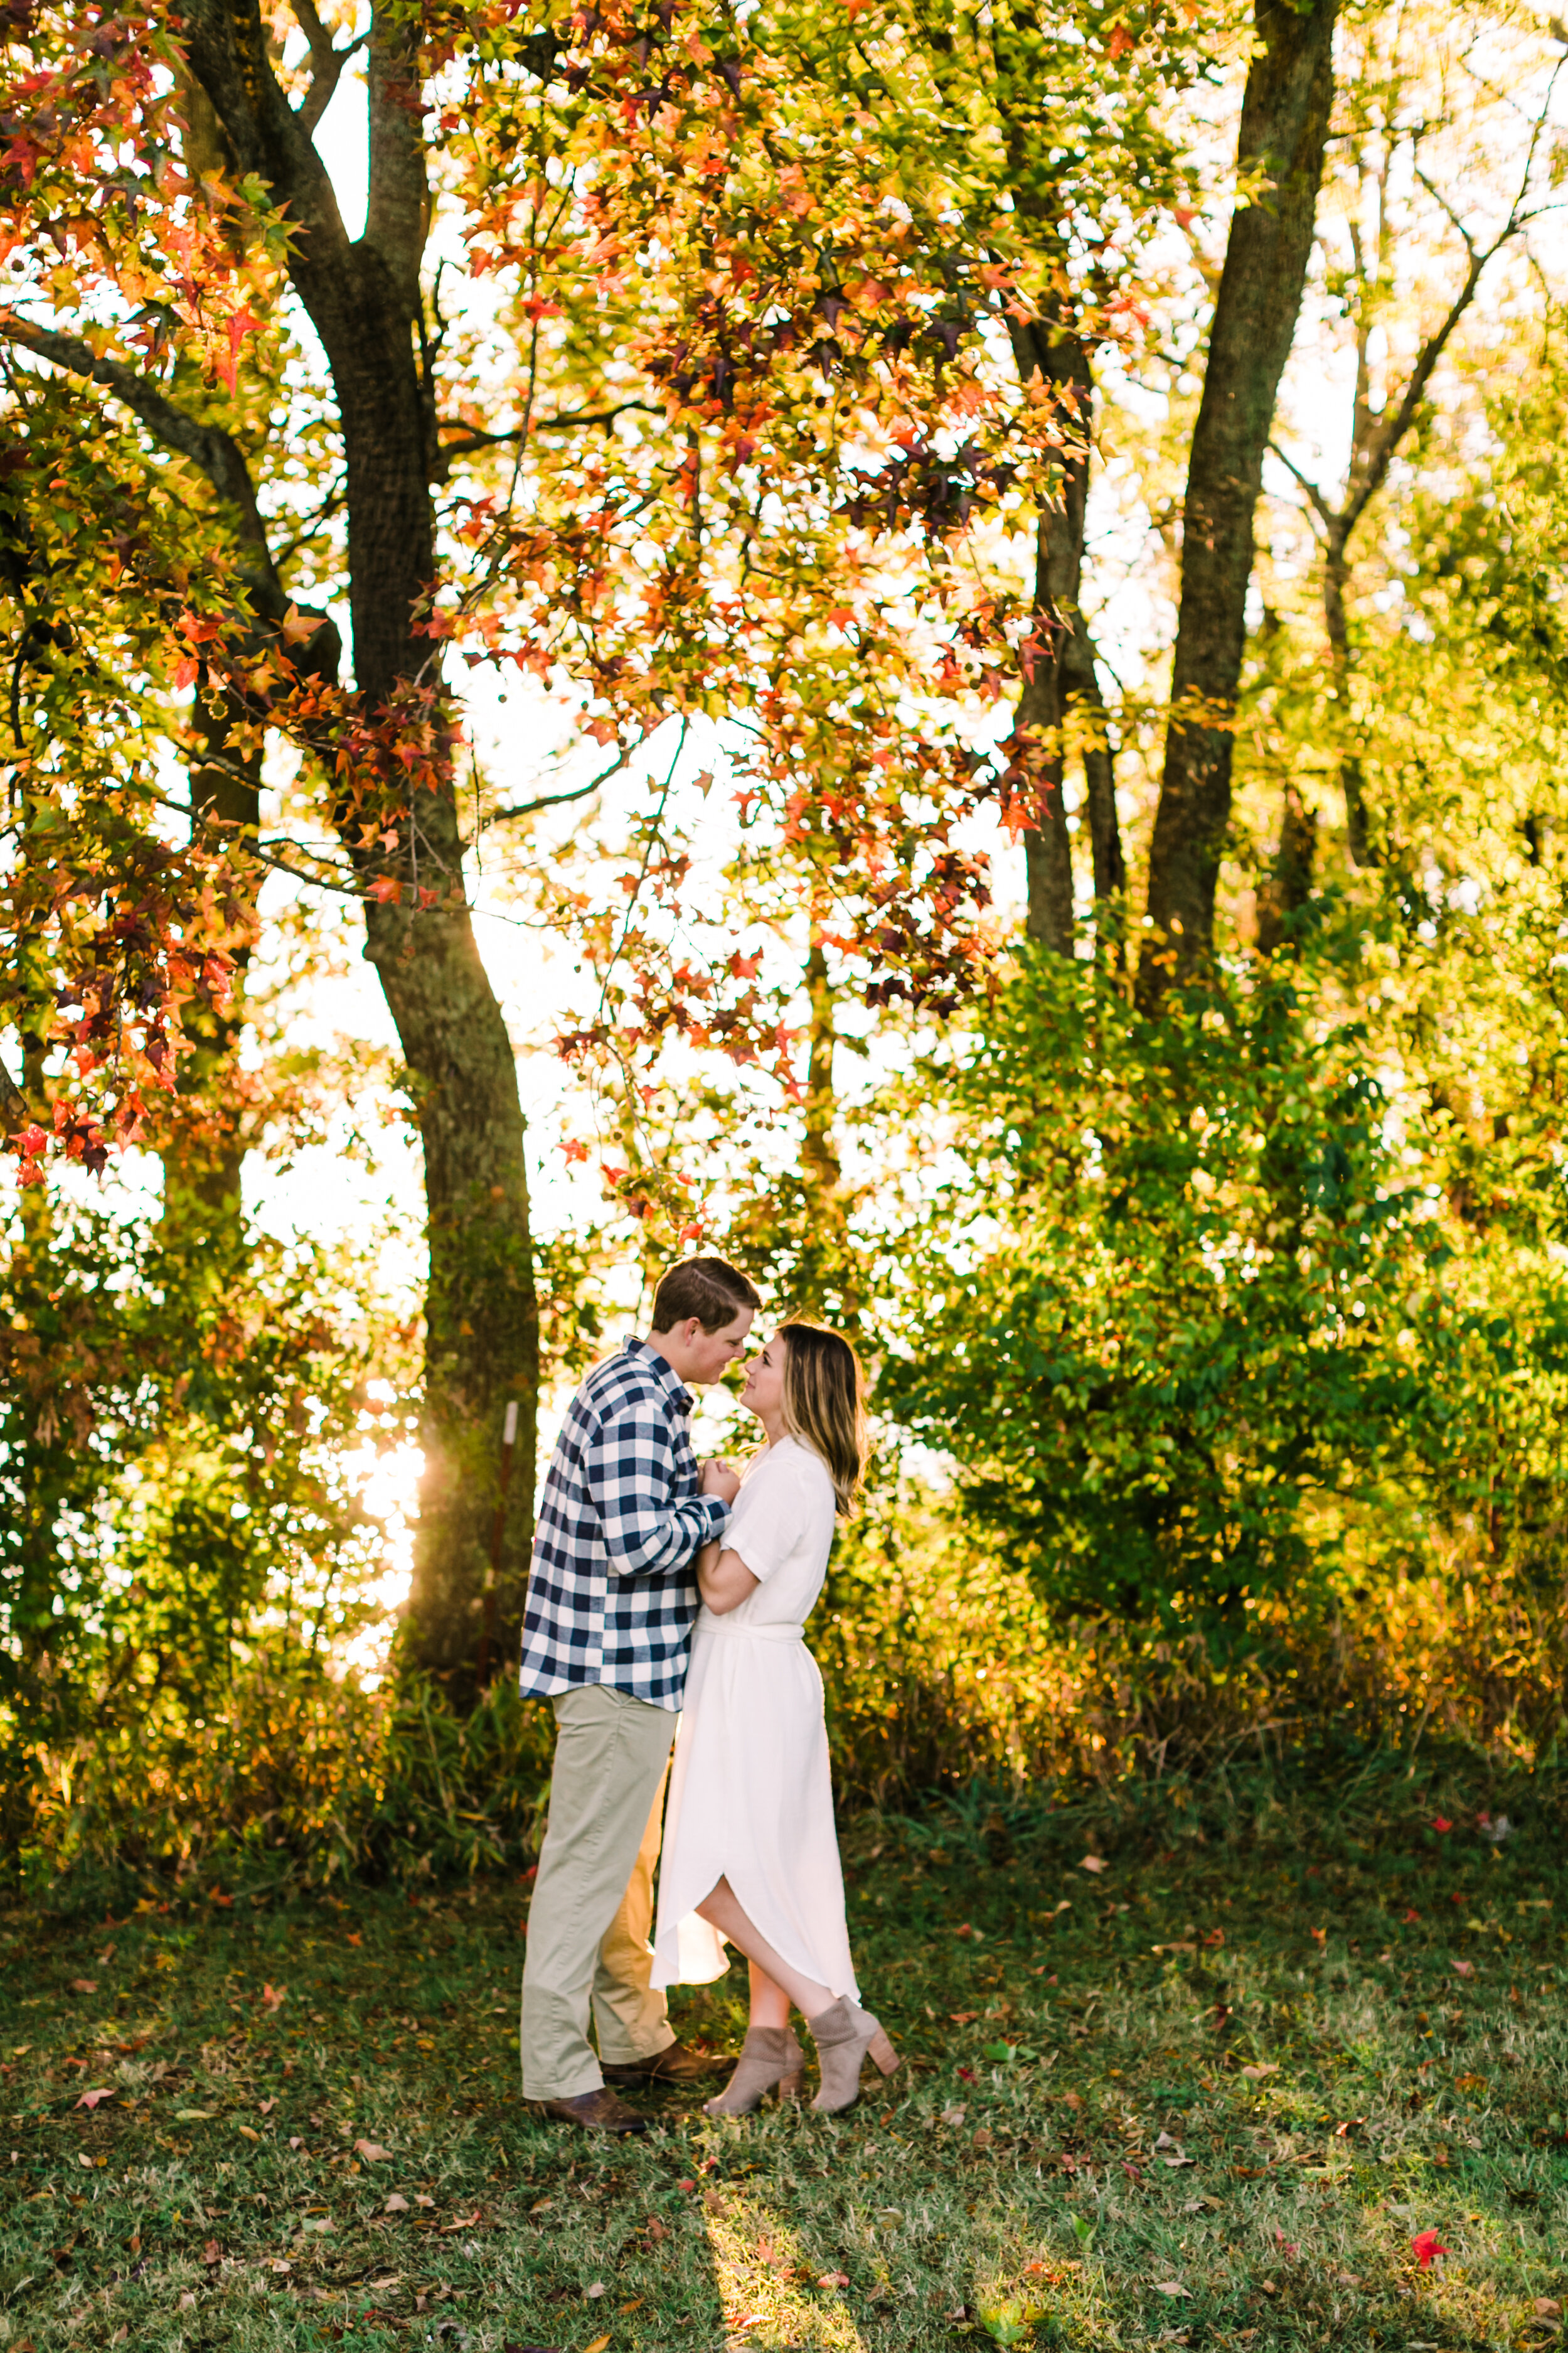 Tennessee+Fall+Engagement+Photos+Puppy (44 of 63).jpg